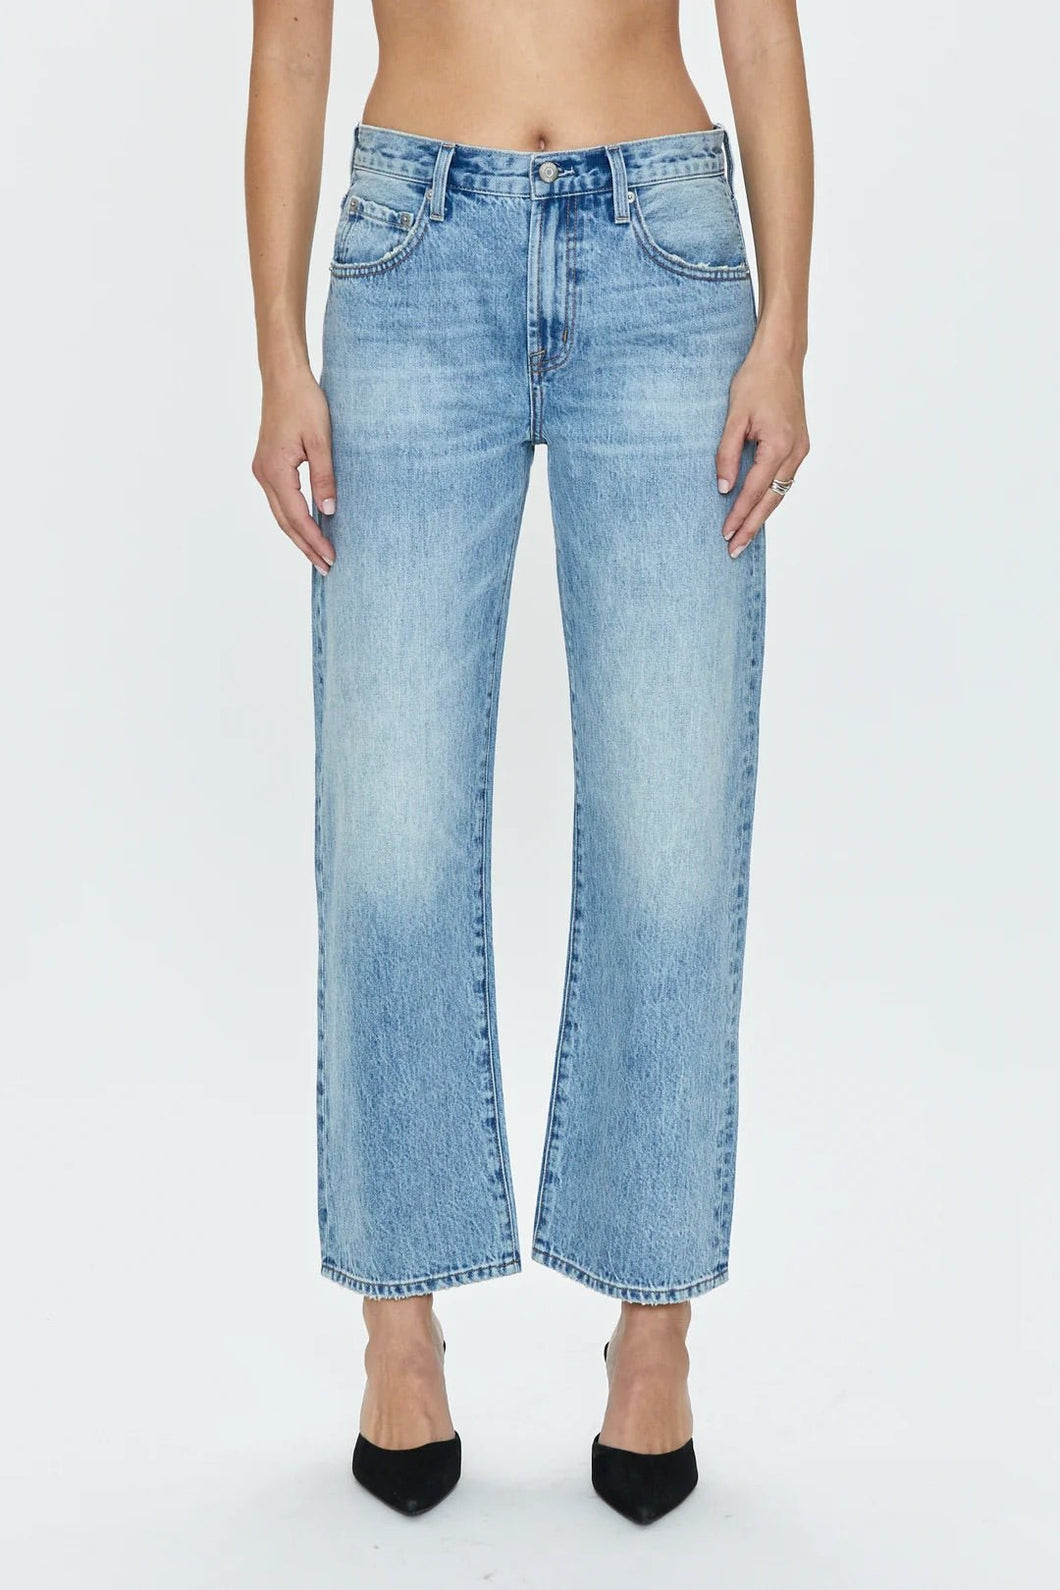 Lexi Mid Rise Bowed Straight Jeans in Bowie - Kirk and VessPistola